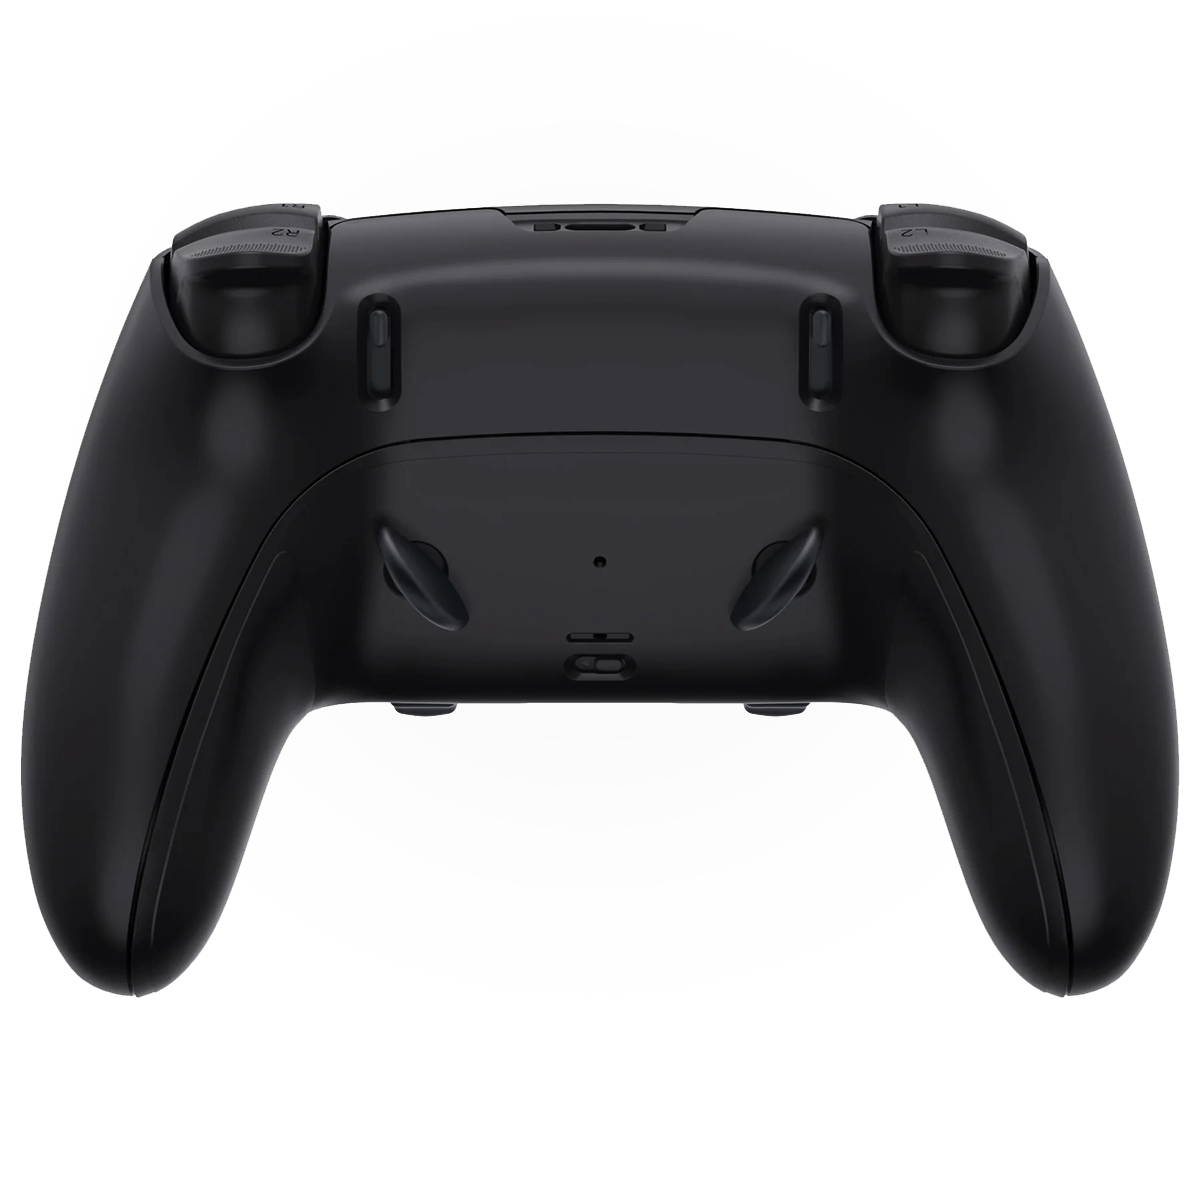 How Much Would You Pay for the DualSense Edge PS5 Pro Controller?